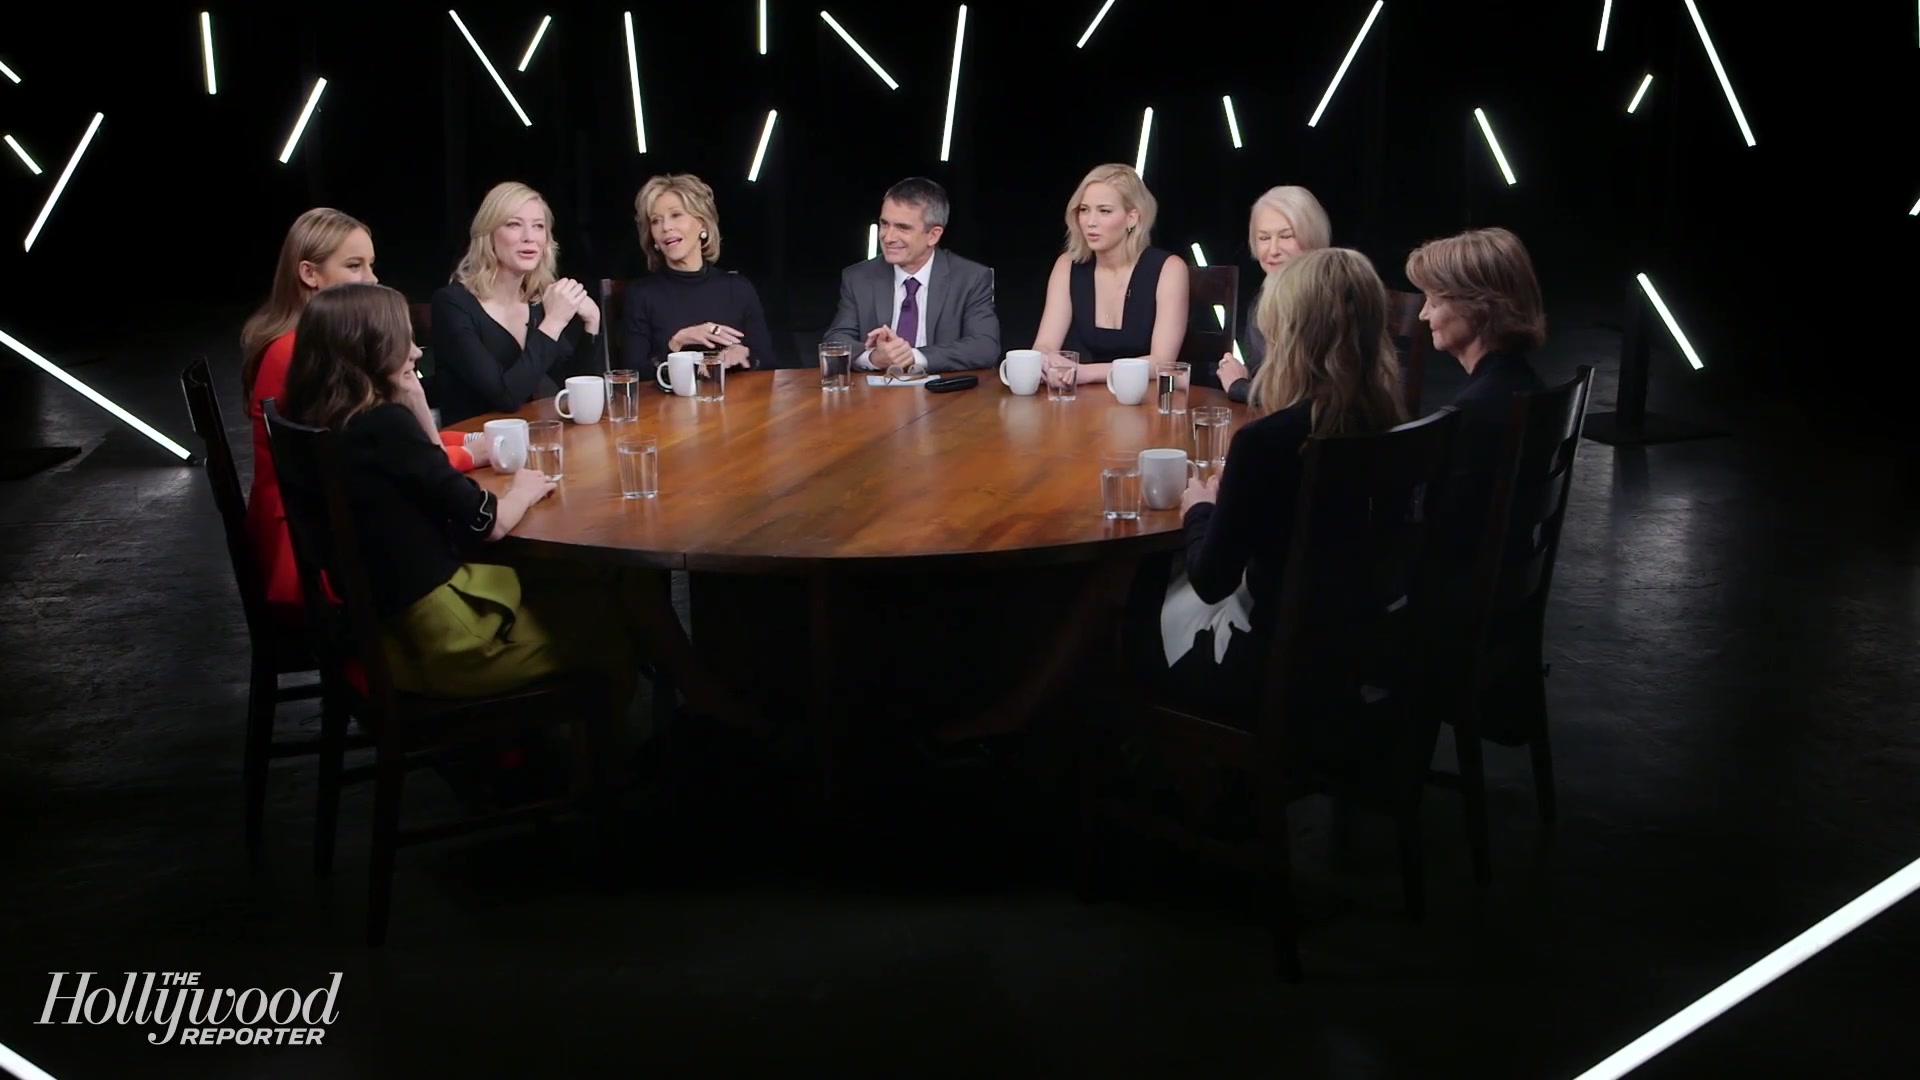 The Hollywood Reporter: The Actress Roundtable – Full interview